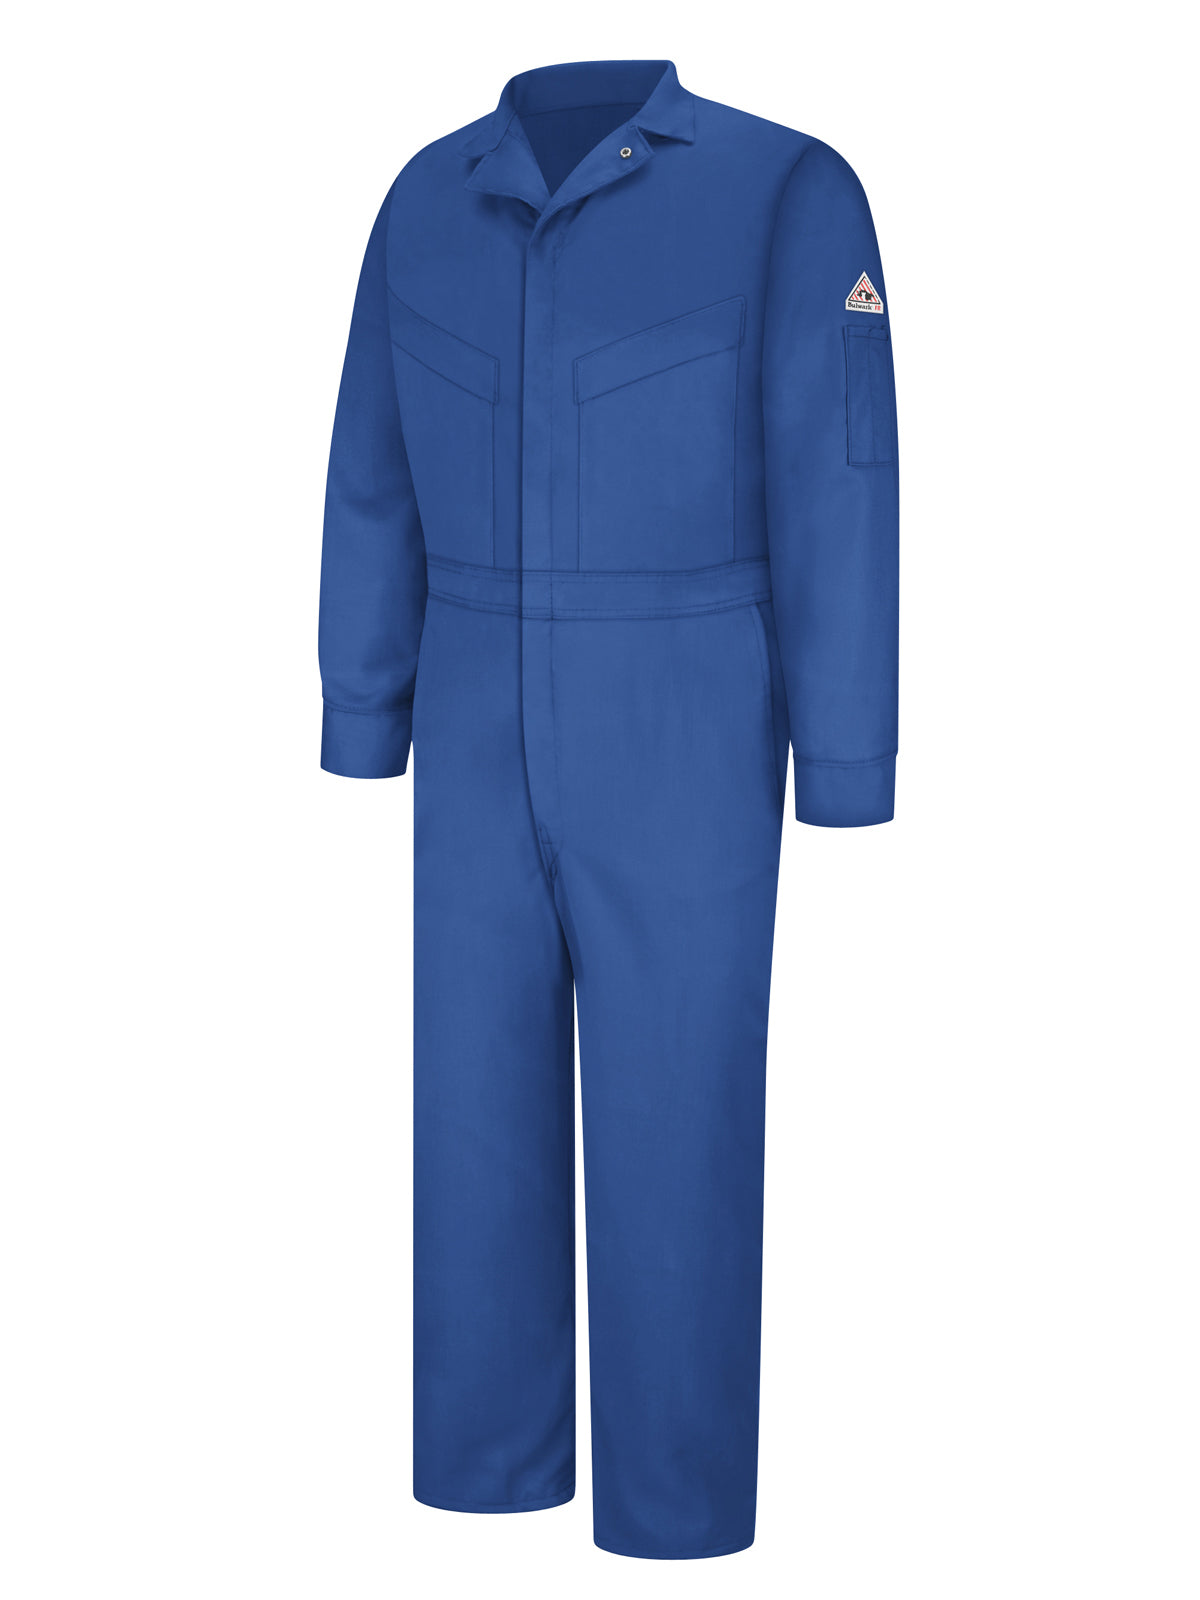 Men's Lightweight Excel Flame-Resistant Deluxe Coverall - CLD4 - Royal Blue